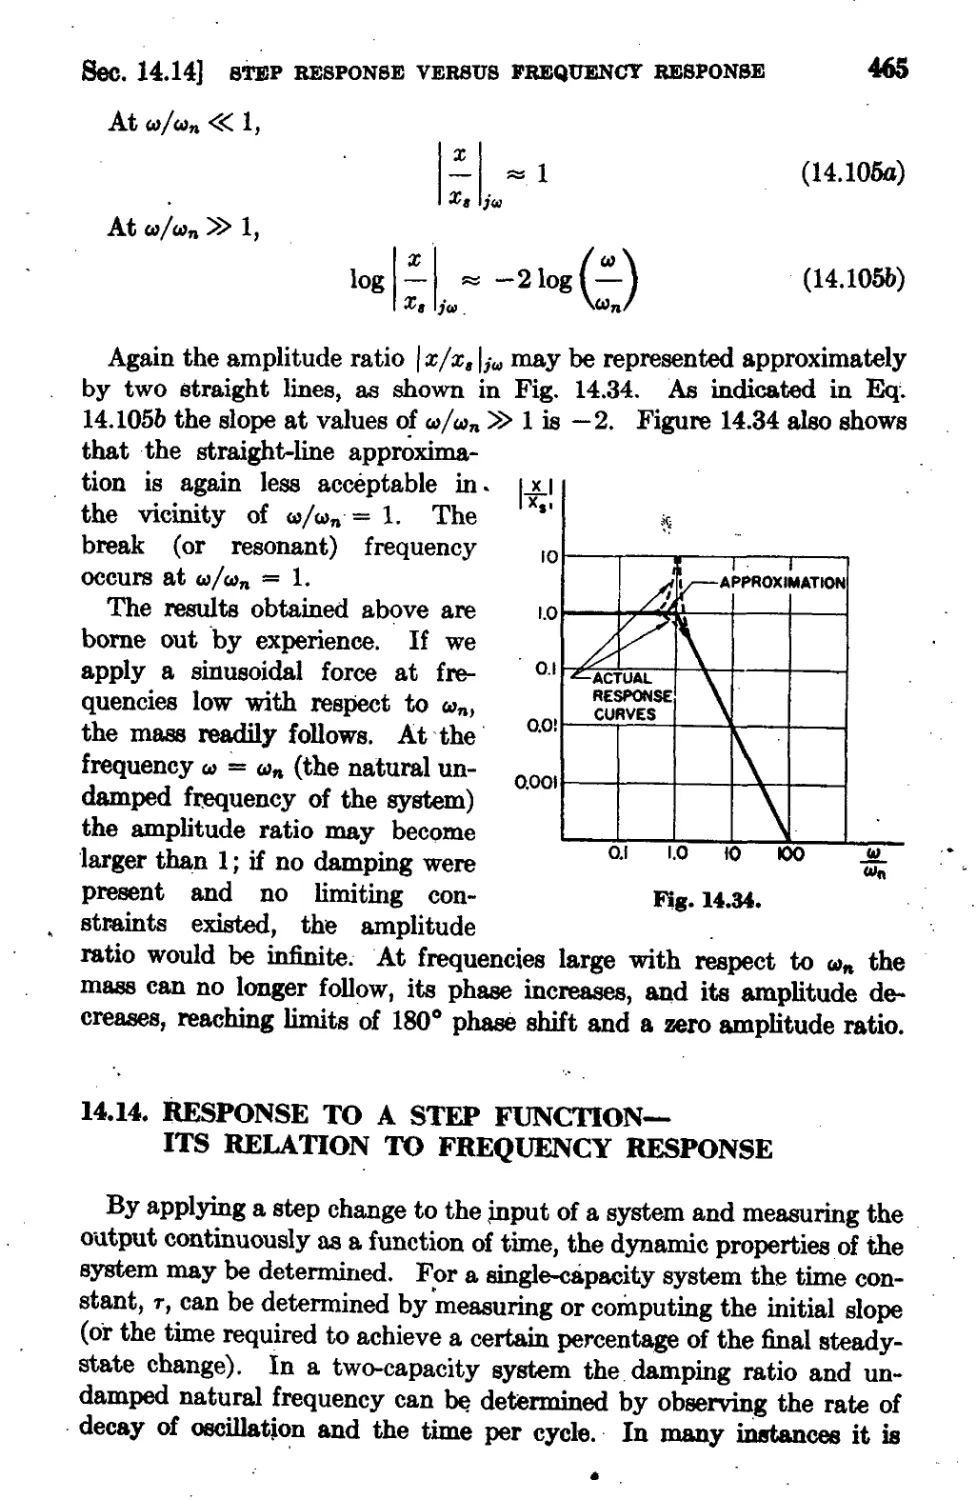 14.14 Response to a Step Function-Its Relation to Frequency Response